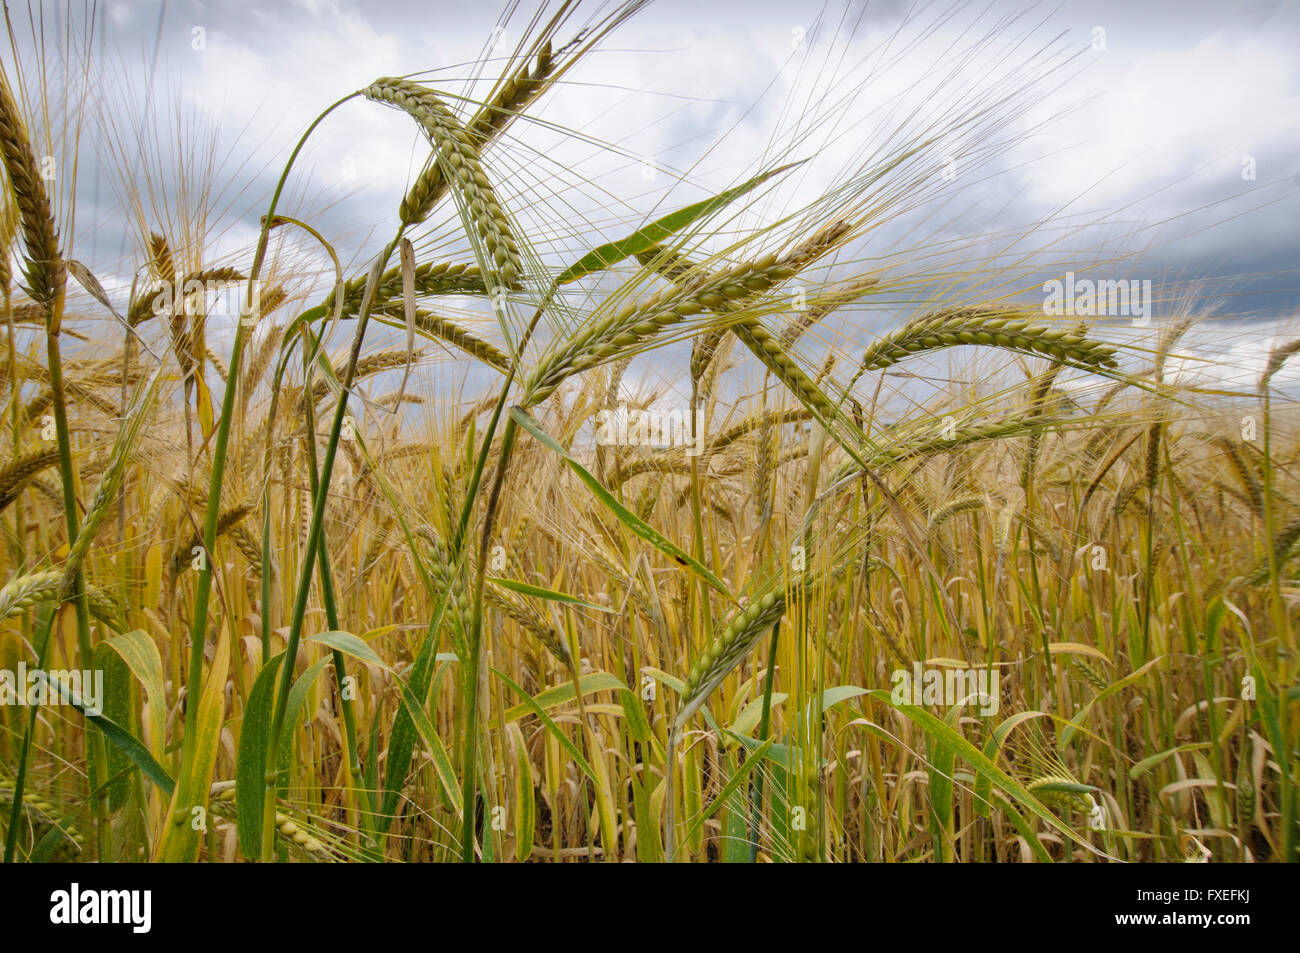 Close-up of barley plants (Hordeum vulgare) with a stormy sky background Stock Photo